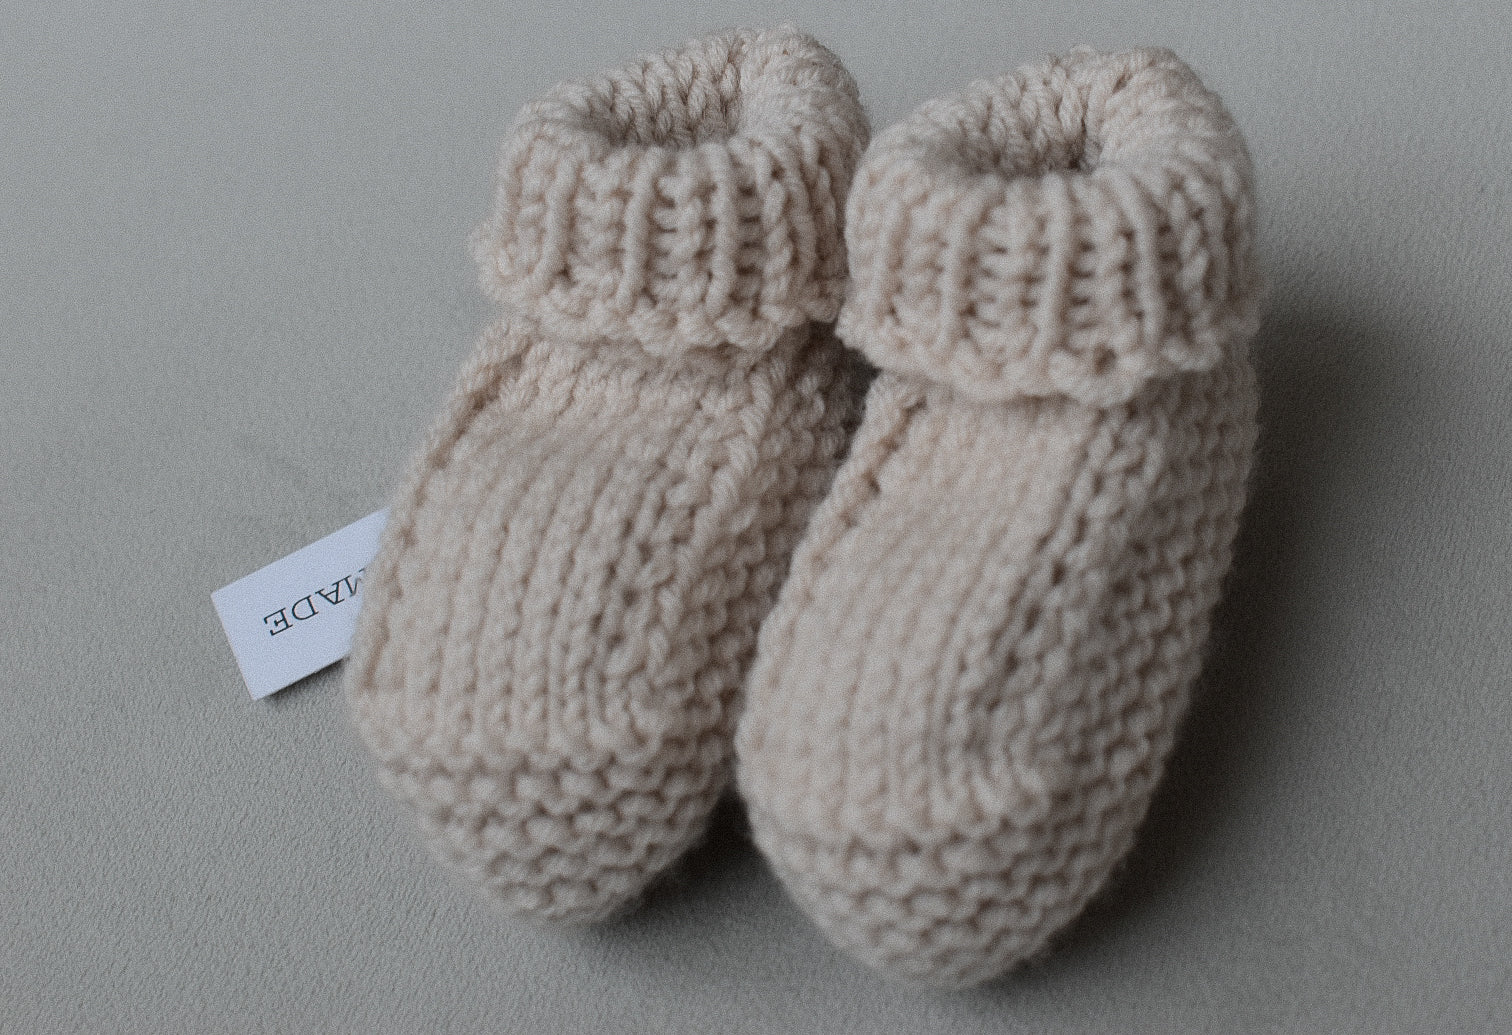 Super soft baby booties, hand knitted in Scotland with 100% merino wool